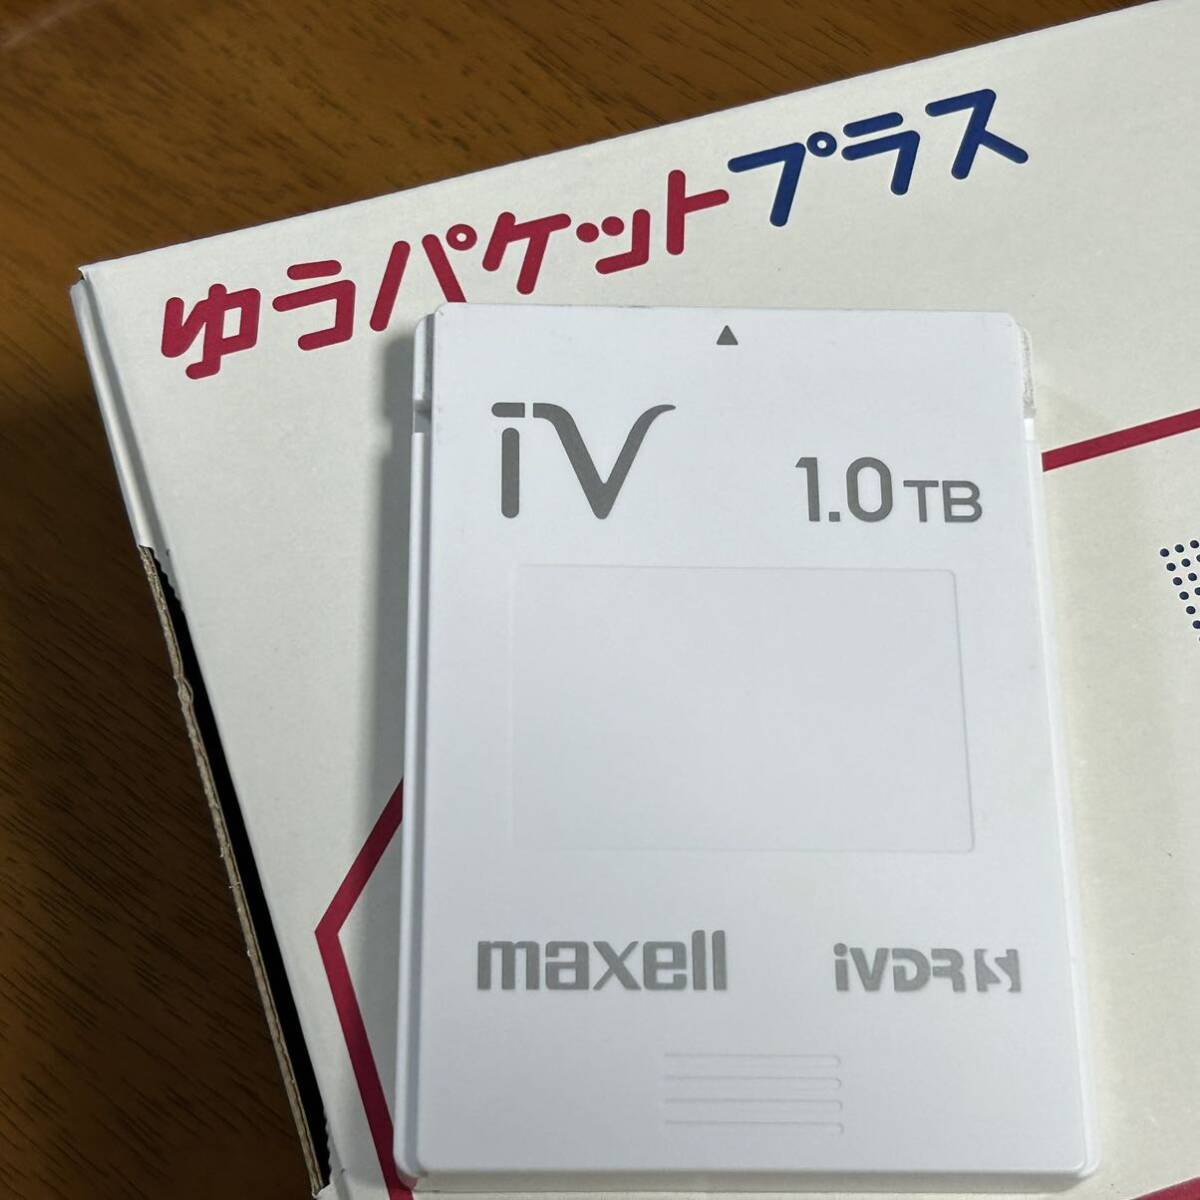 mak cell maxell iVDR-S кассета HDD 1TB